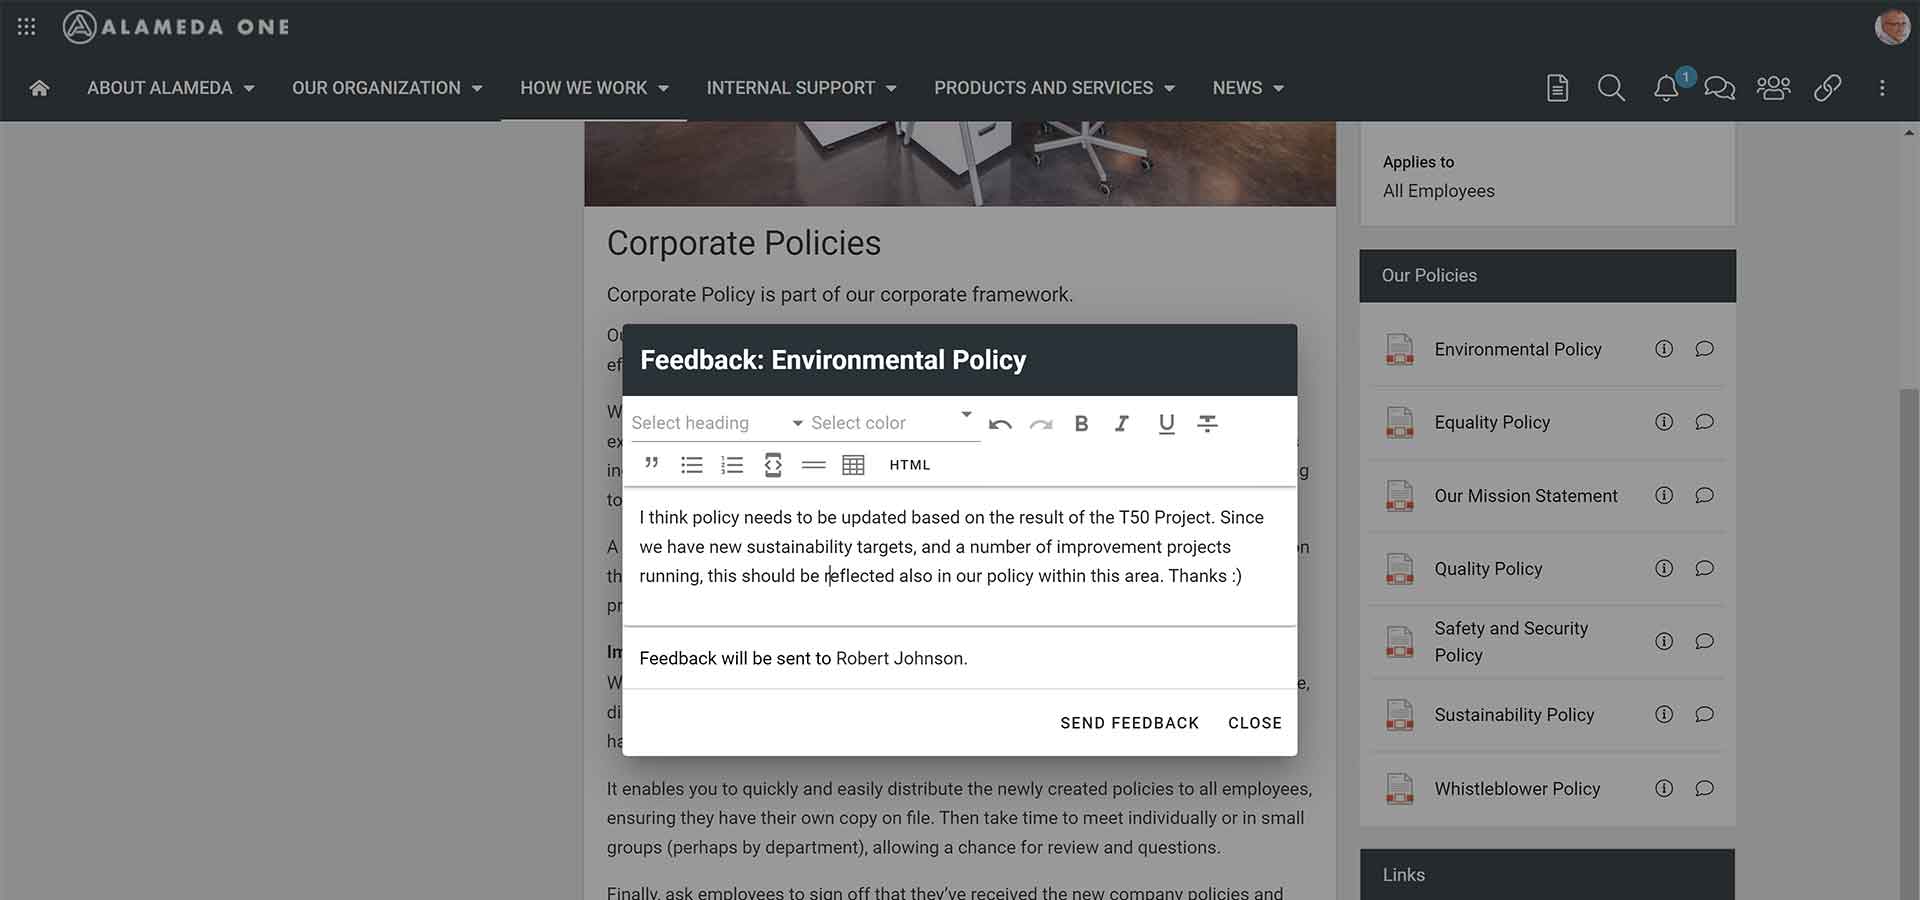 Image 11: Providing feedback on a corporate policy